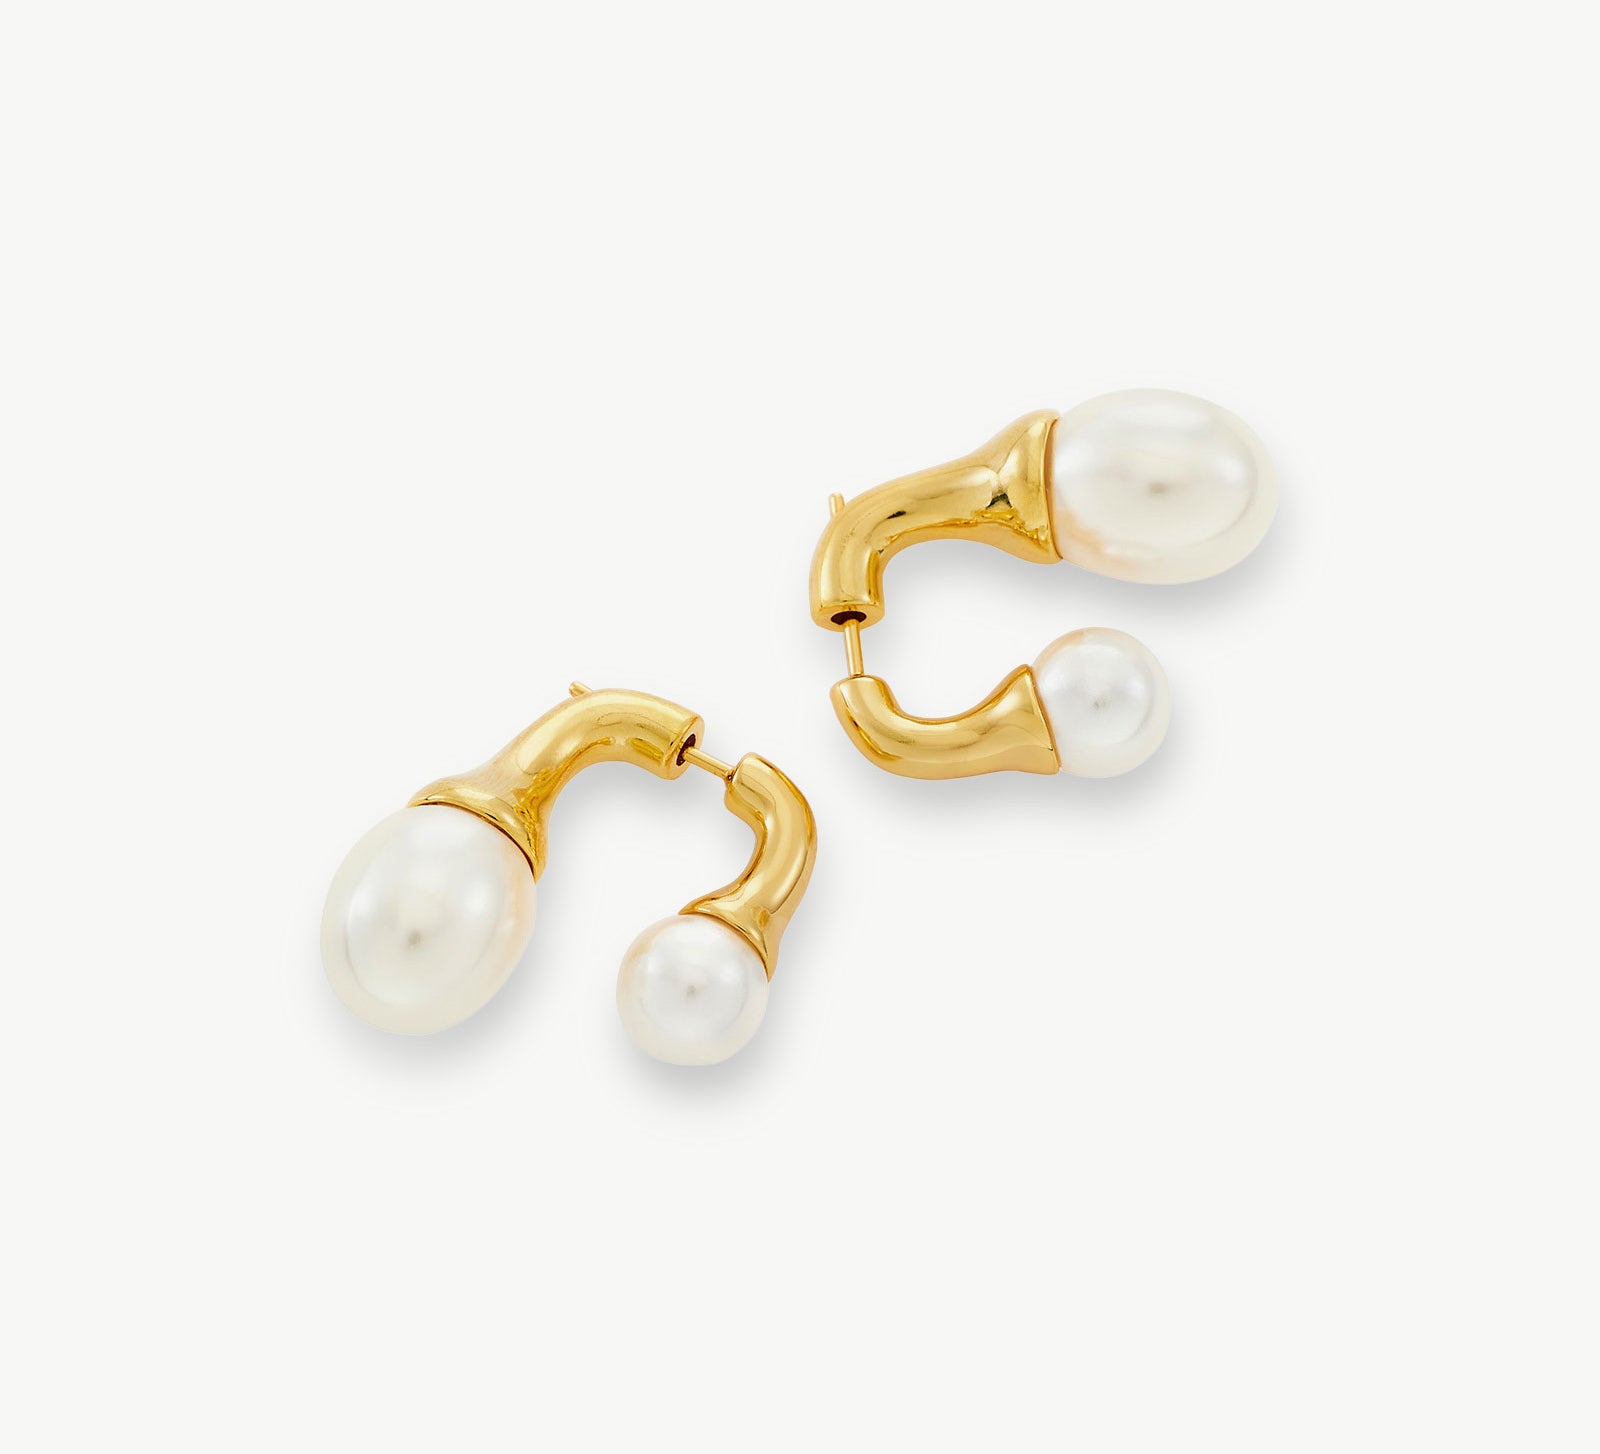 Double Pearls Earrings in Gold, a luxurious and timeless pair featuring dual pearls for an opulent and sophisticated look